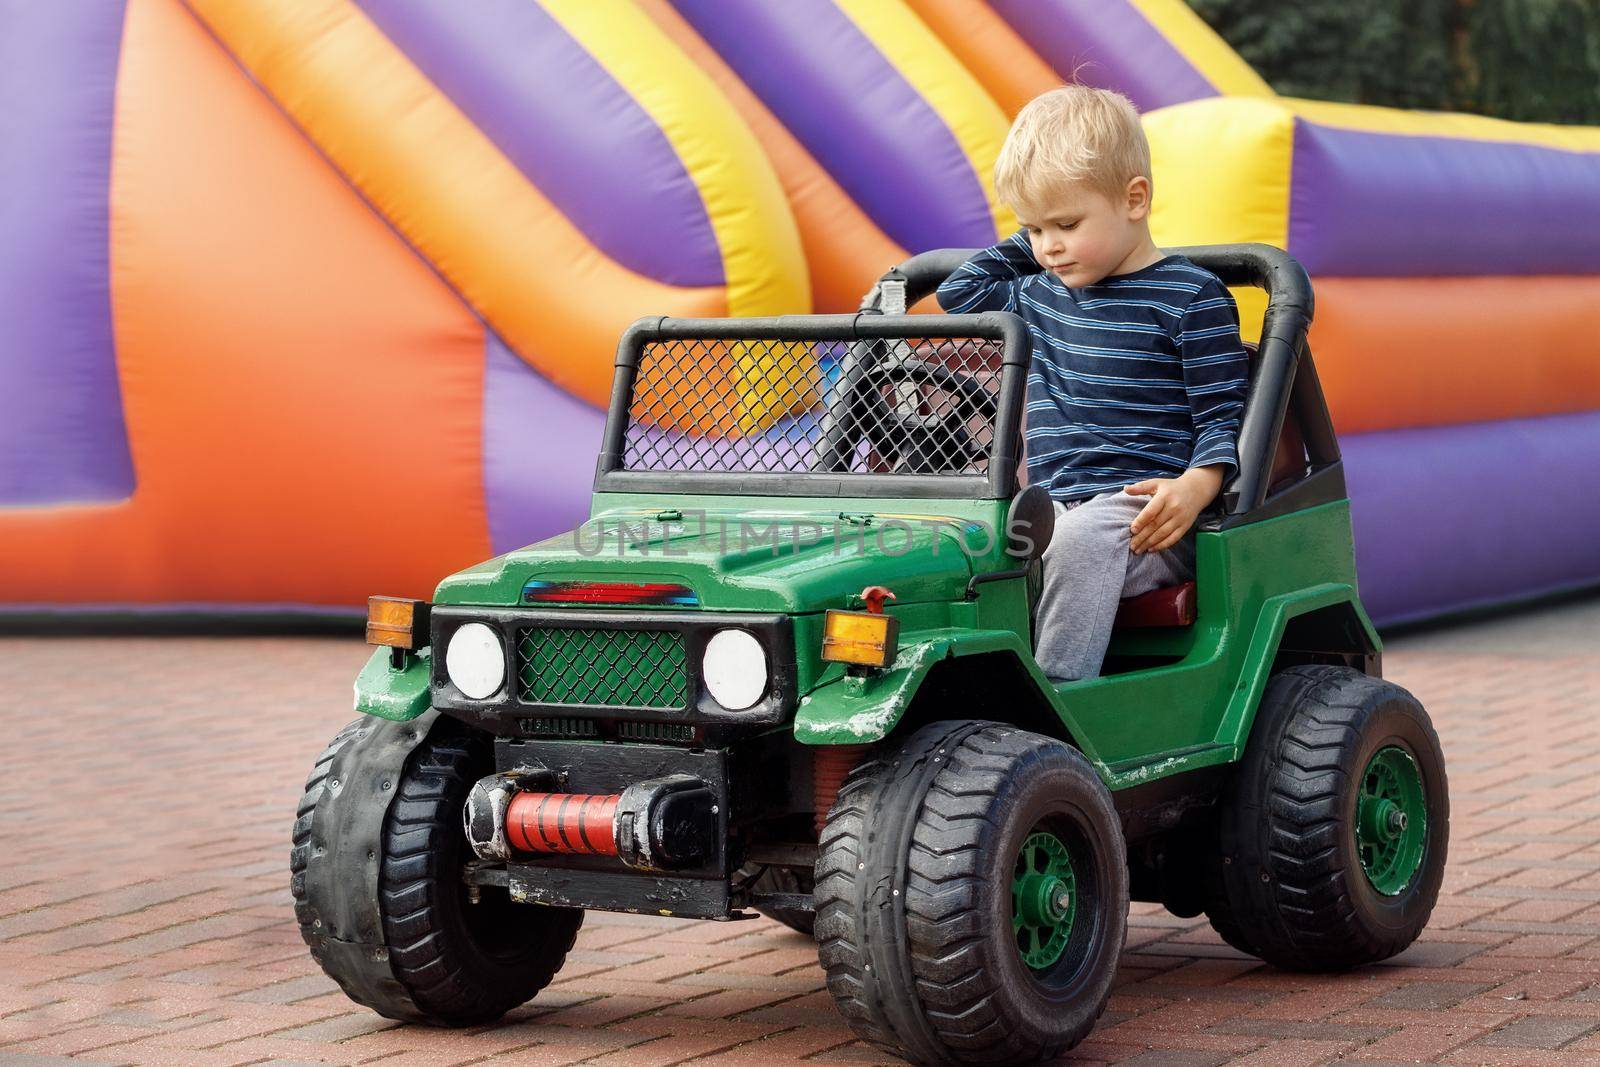 Little child driving green toy car, colored inflatable trampoline in background by Lincikas